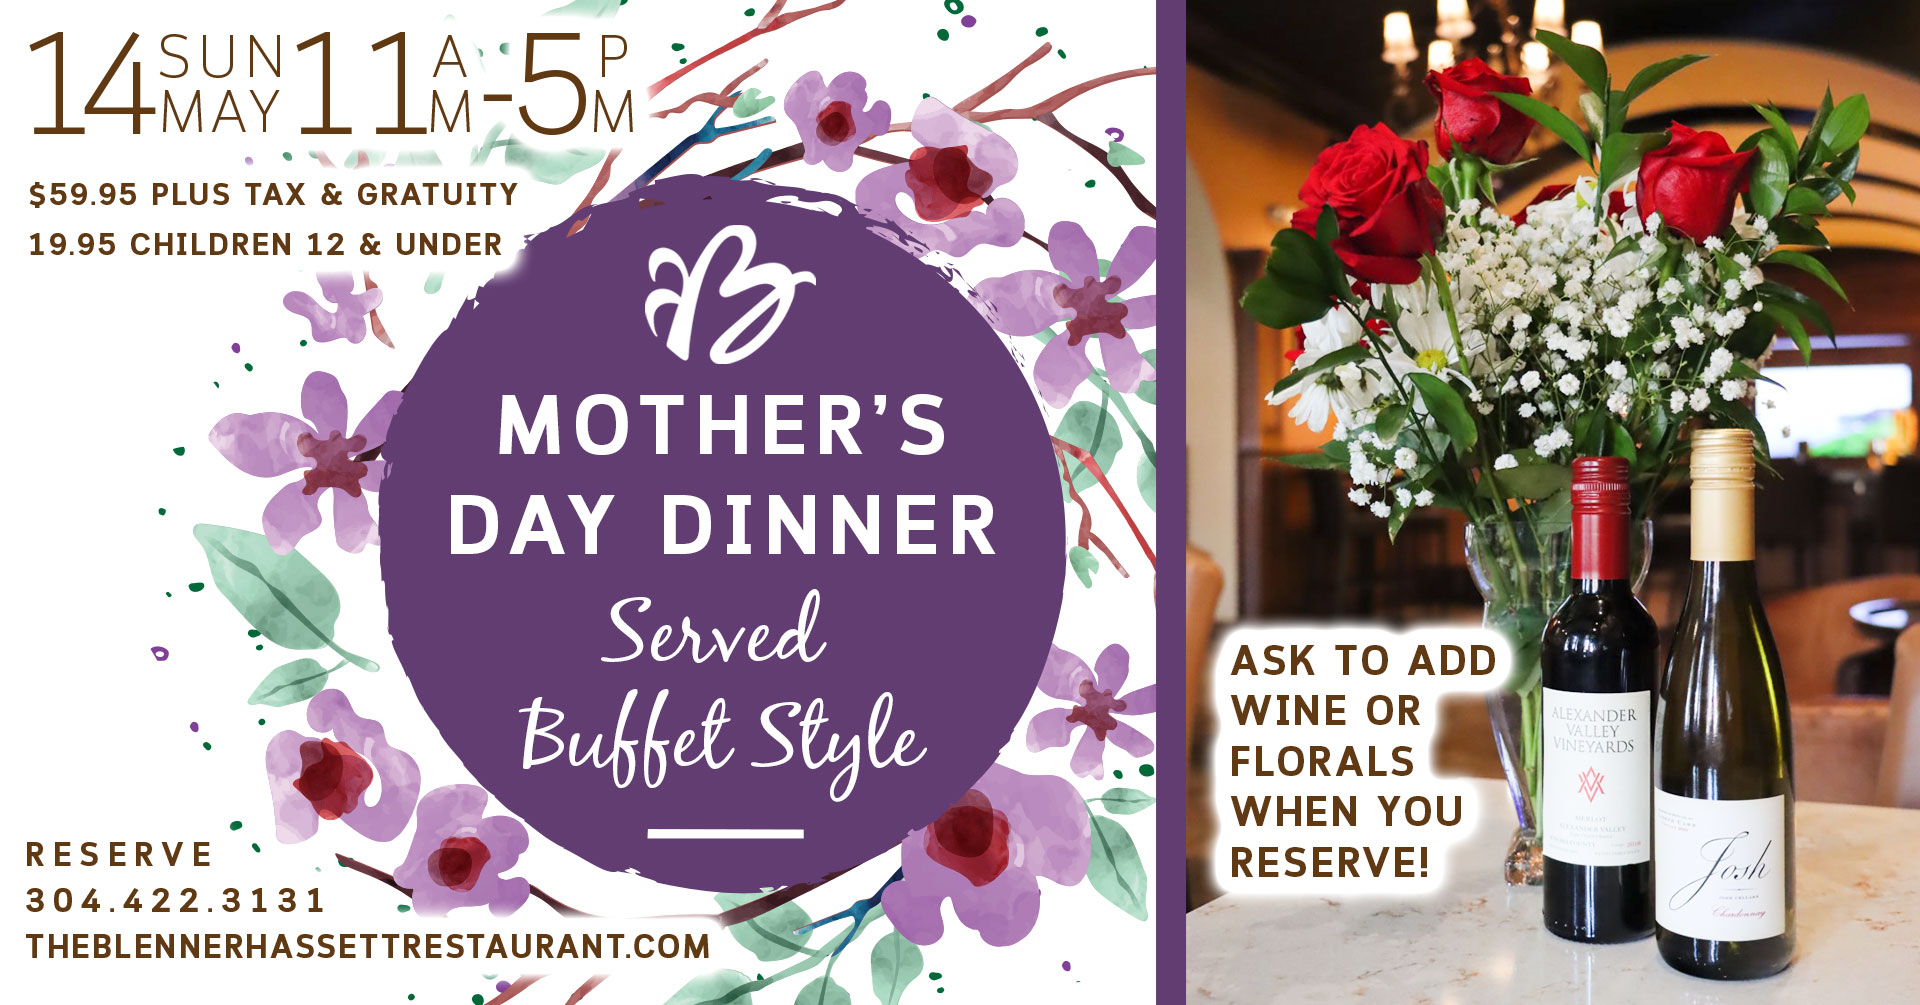 Mother's Day Dinner Served Buffet Style Sunday May 14th 11 AM - 5 PM 59.95 plus tax and gratuity 19.95 cihldren 12 and under